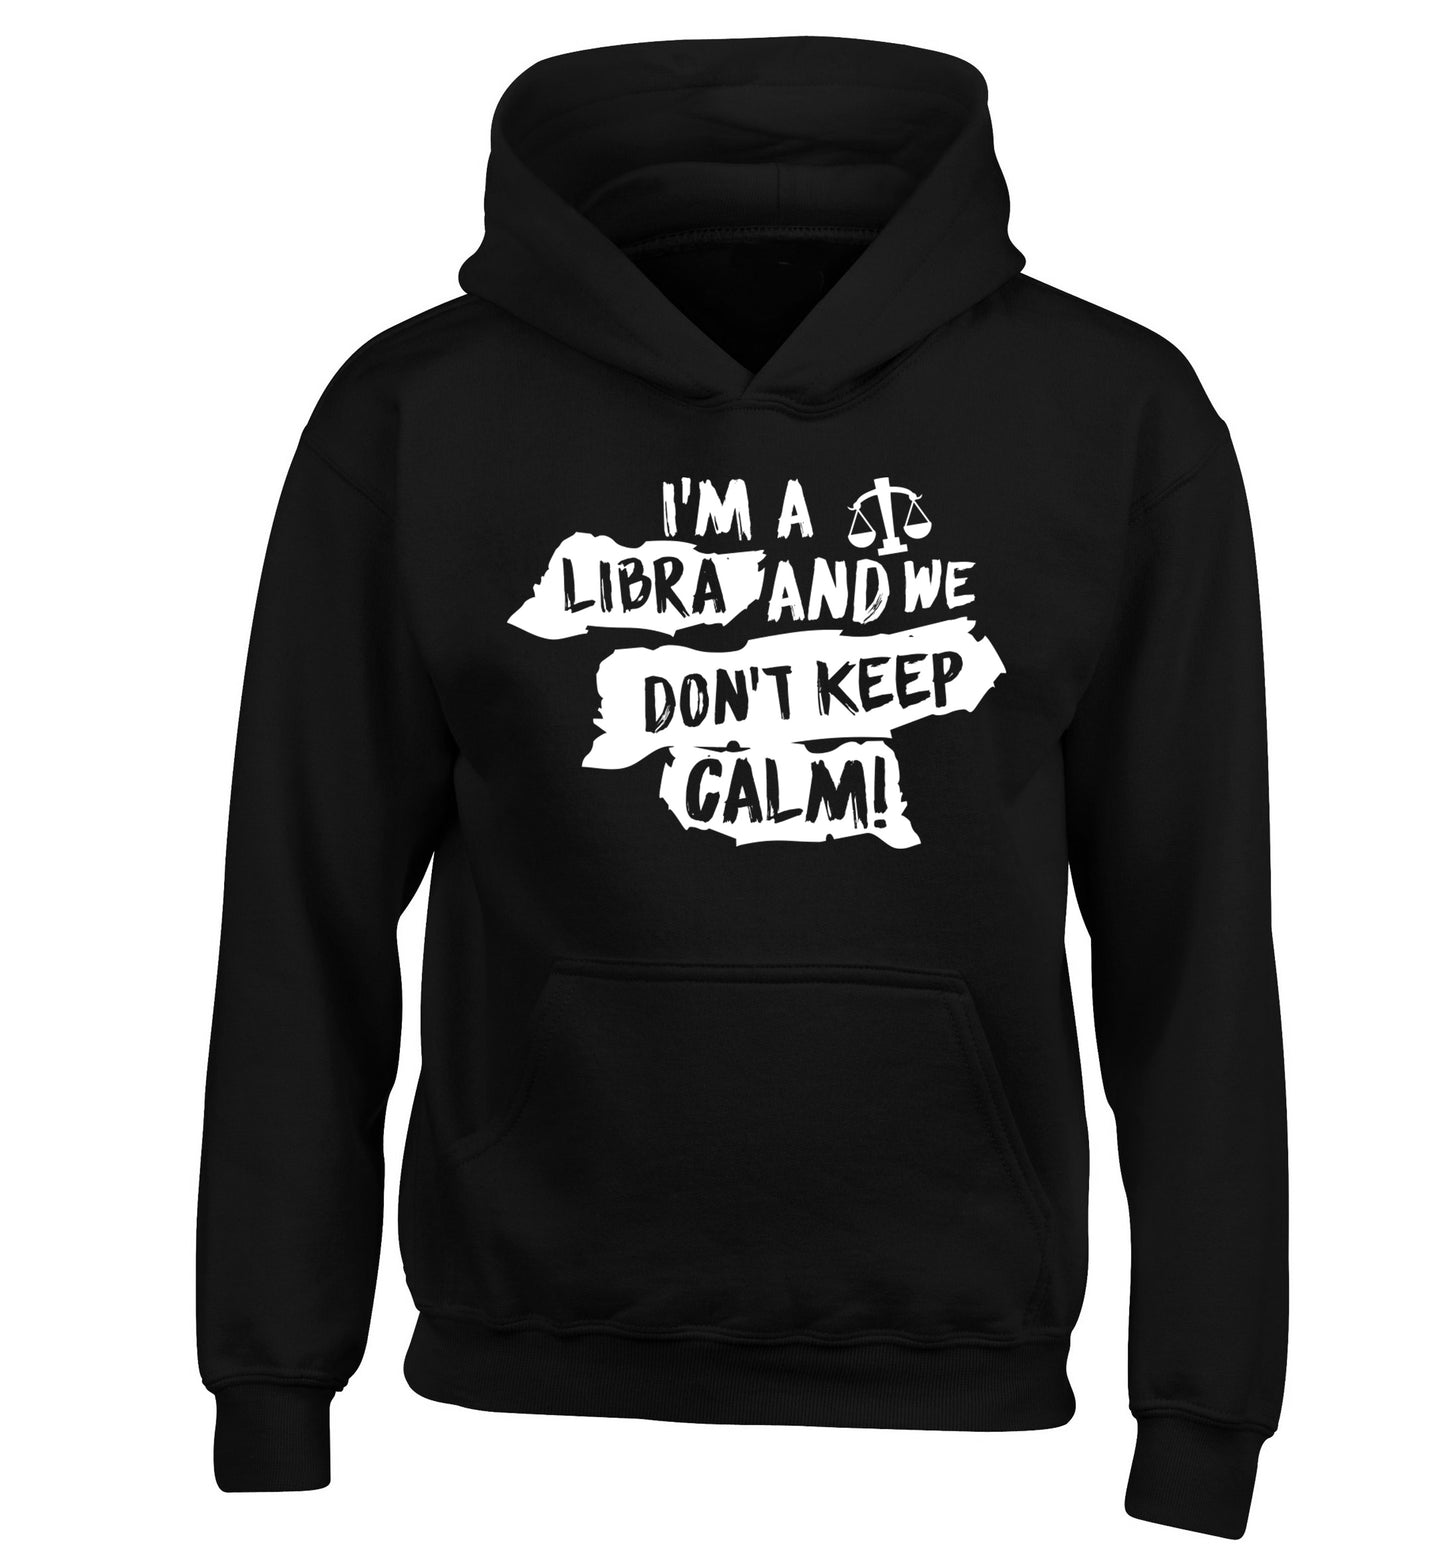 I'm a libra and we don't keep calm children's black hoodie 12-13 Years